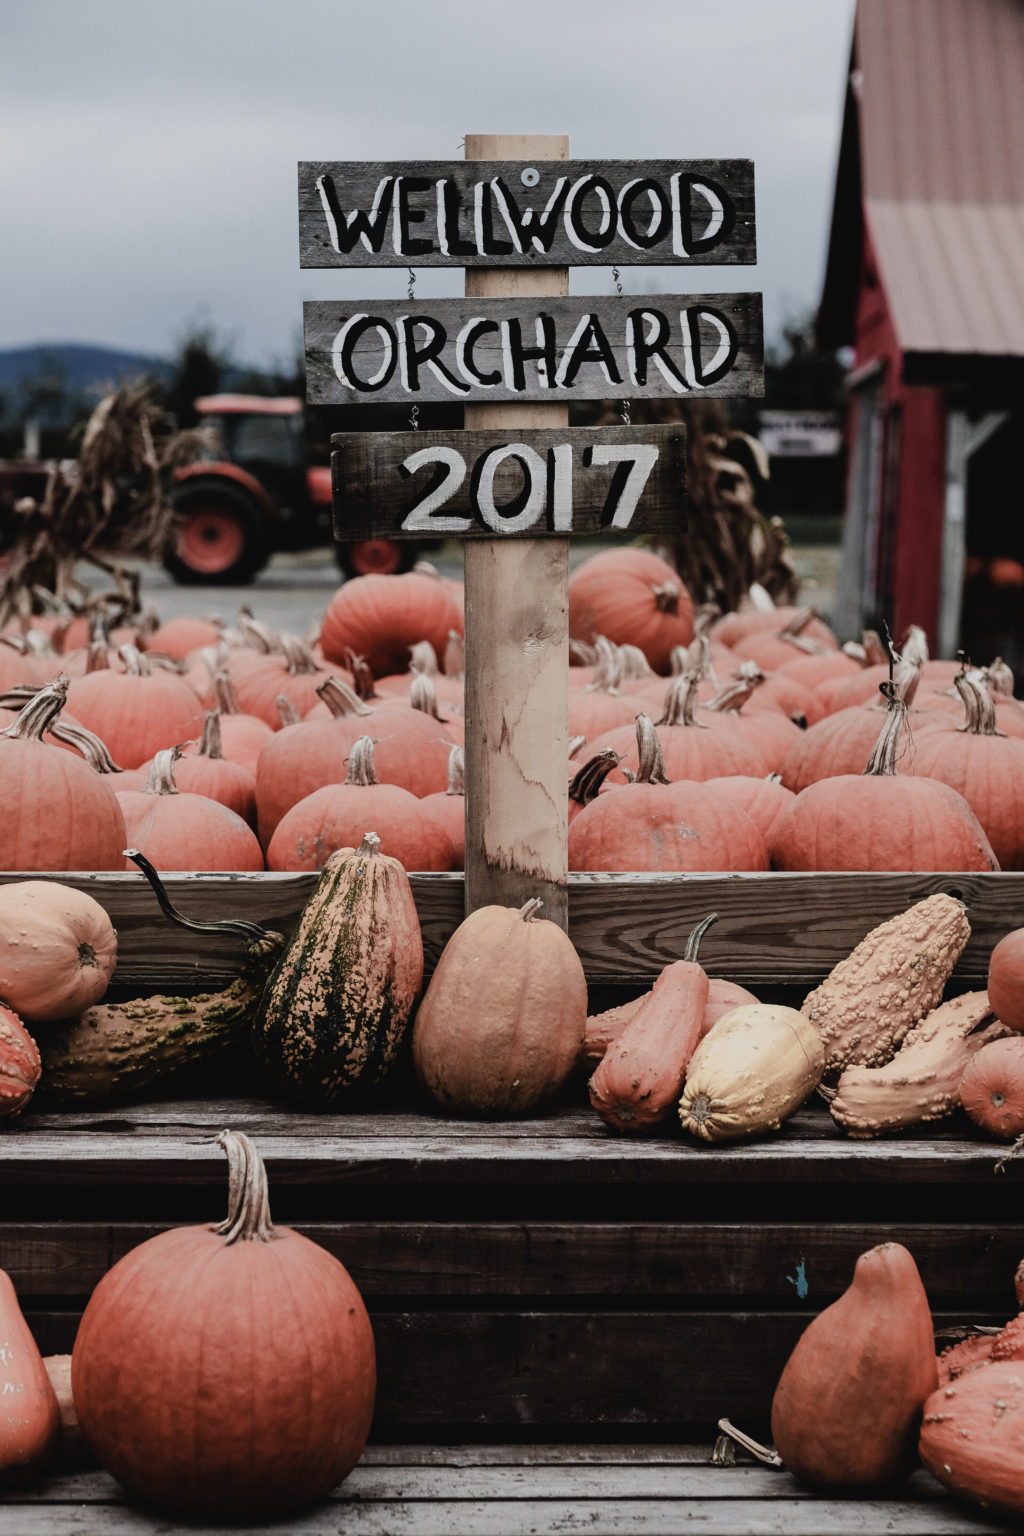 Wellwood Orchard in Vermont